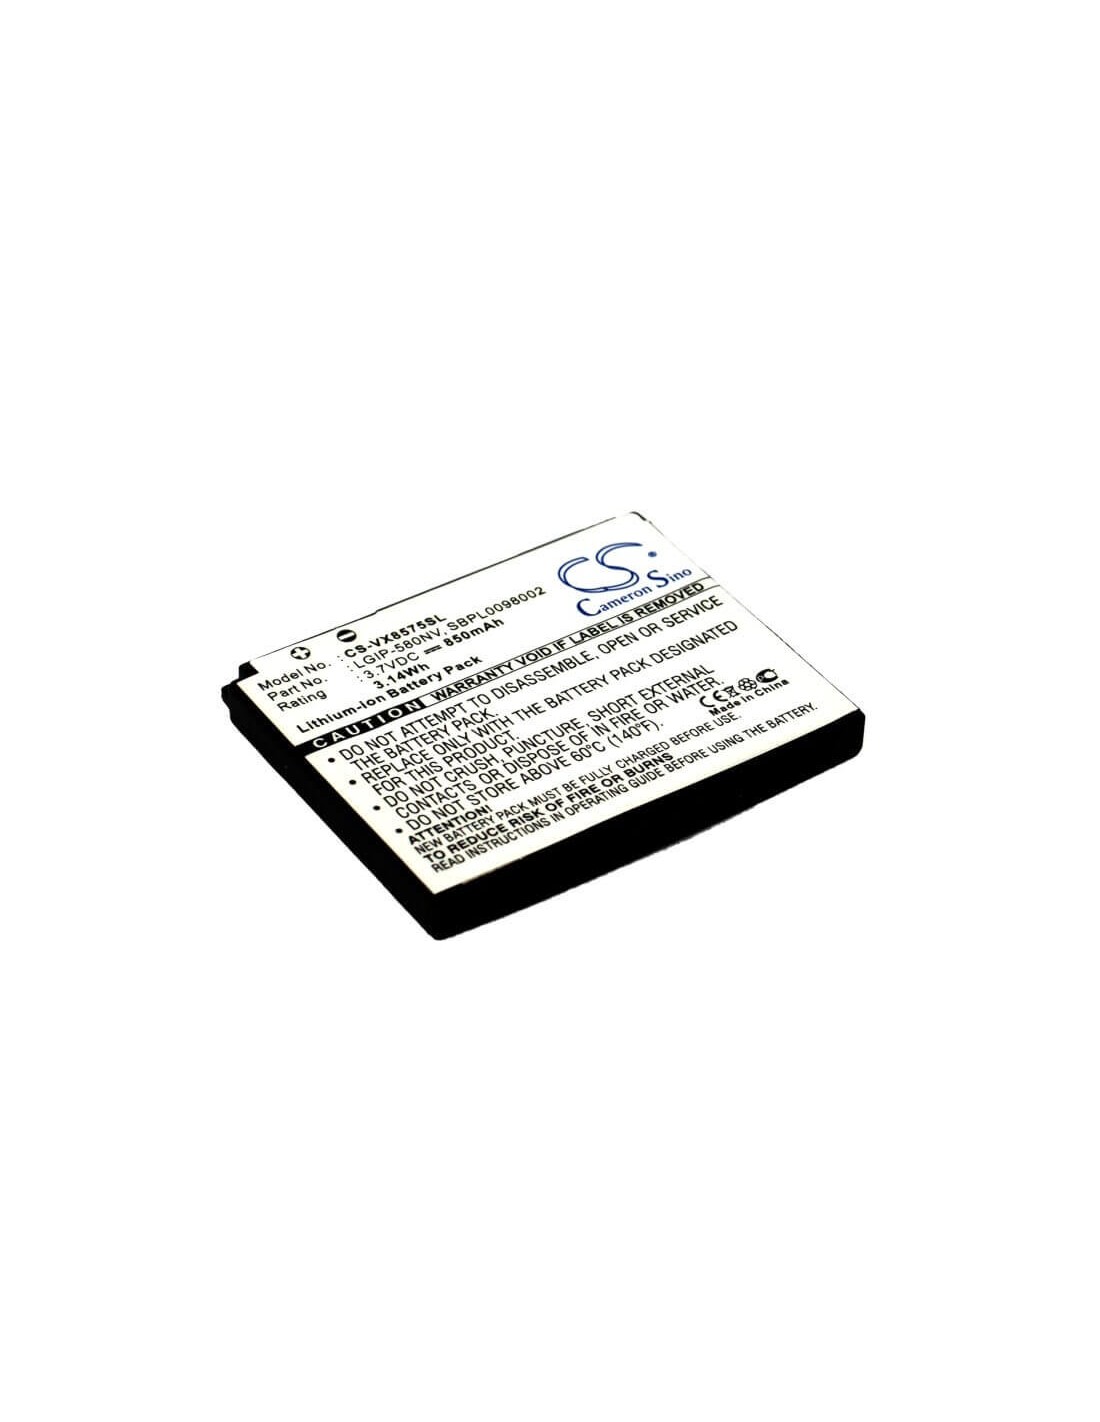 Battery for LG VX8575, Chocolate Touch, Touch AX8575 3.7V, 850mAh - 3.15Wh